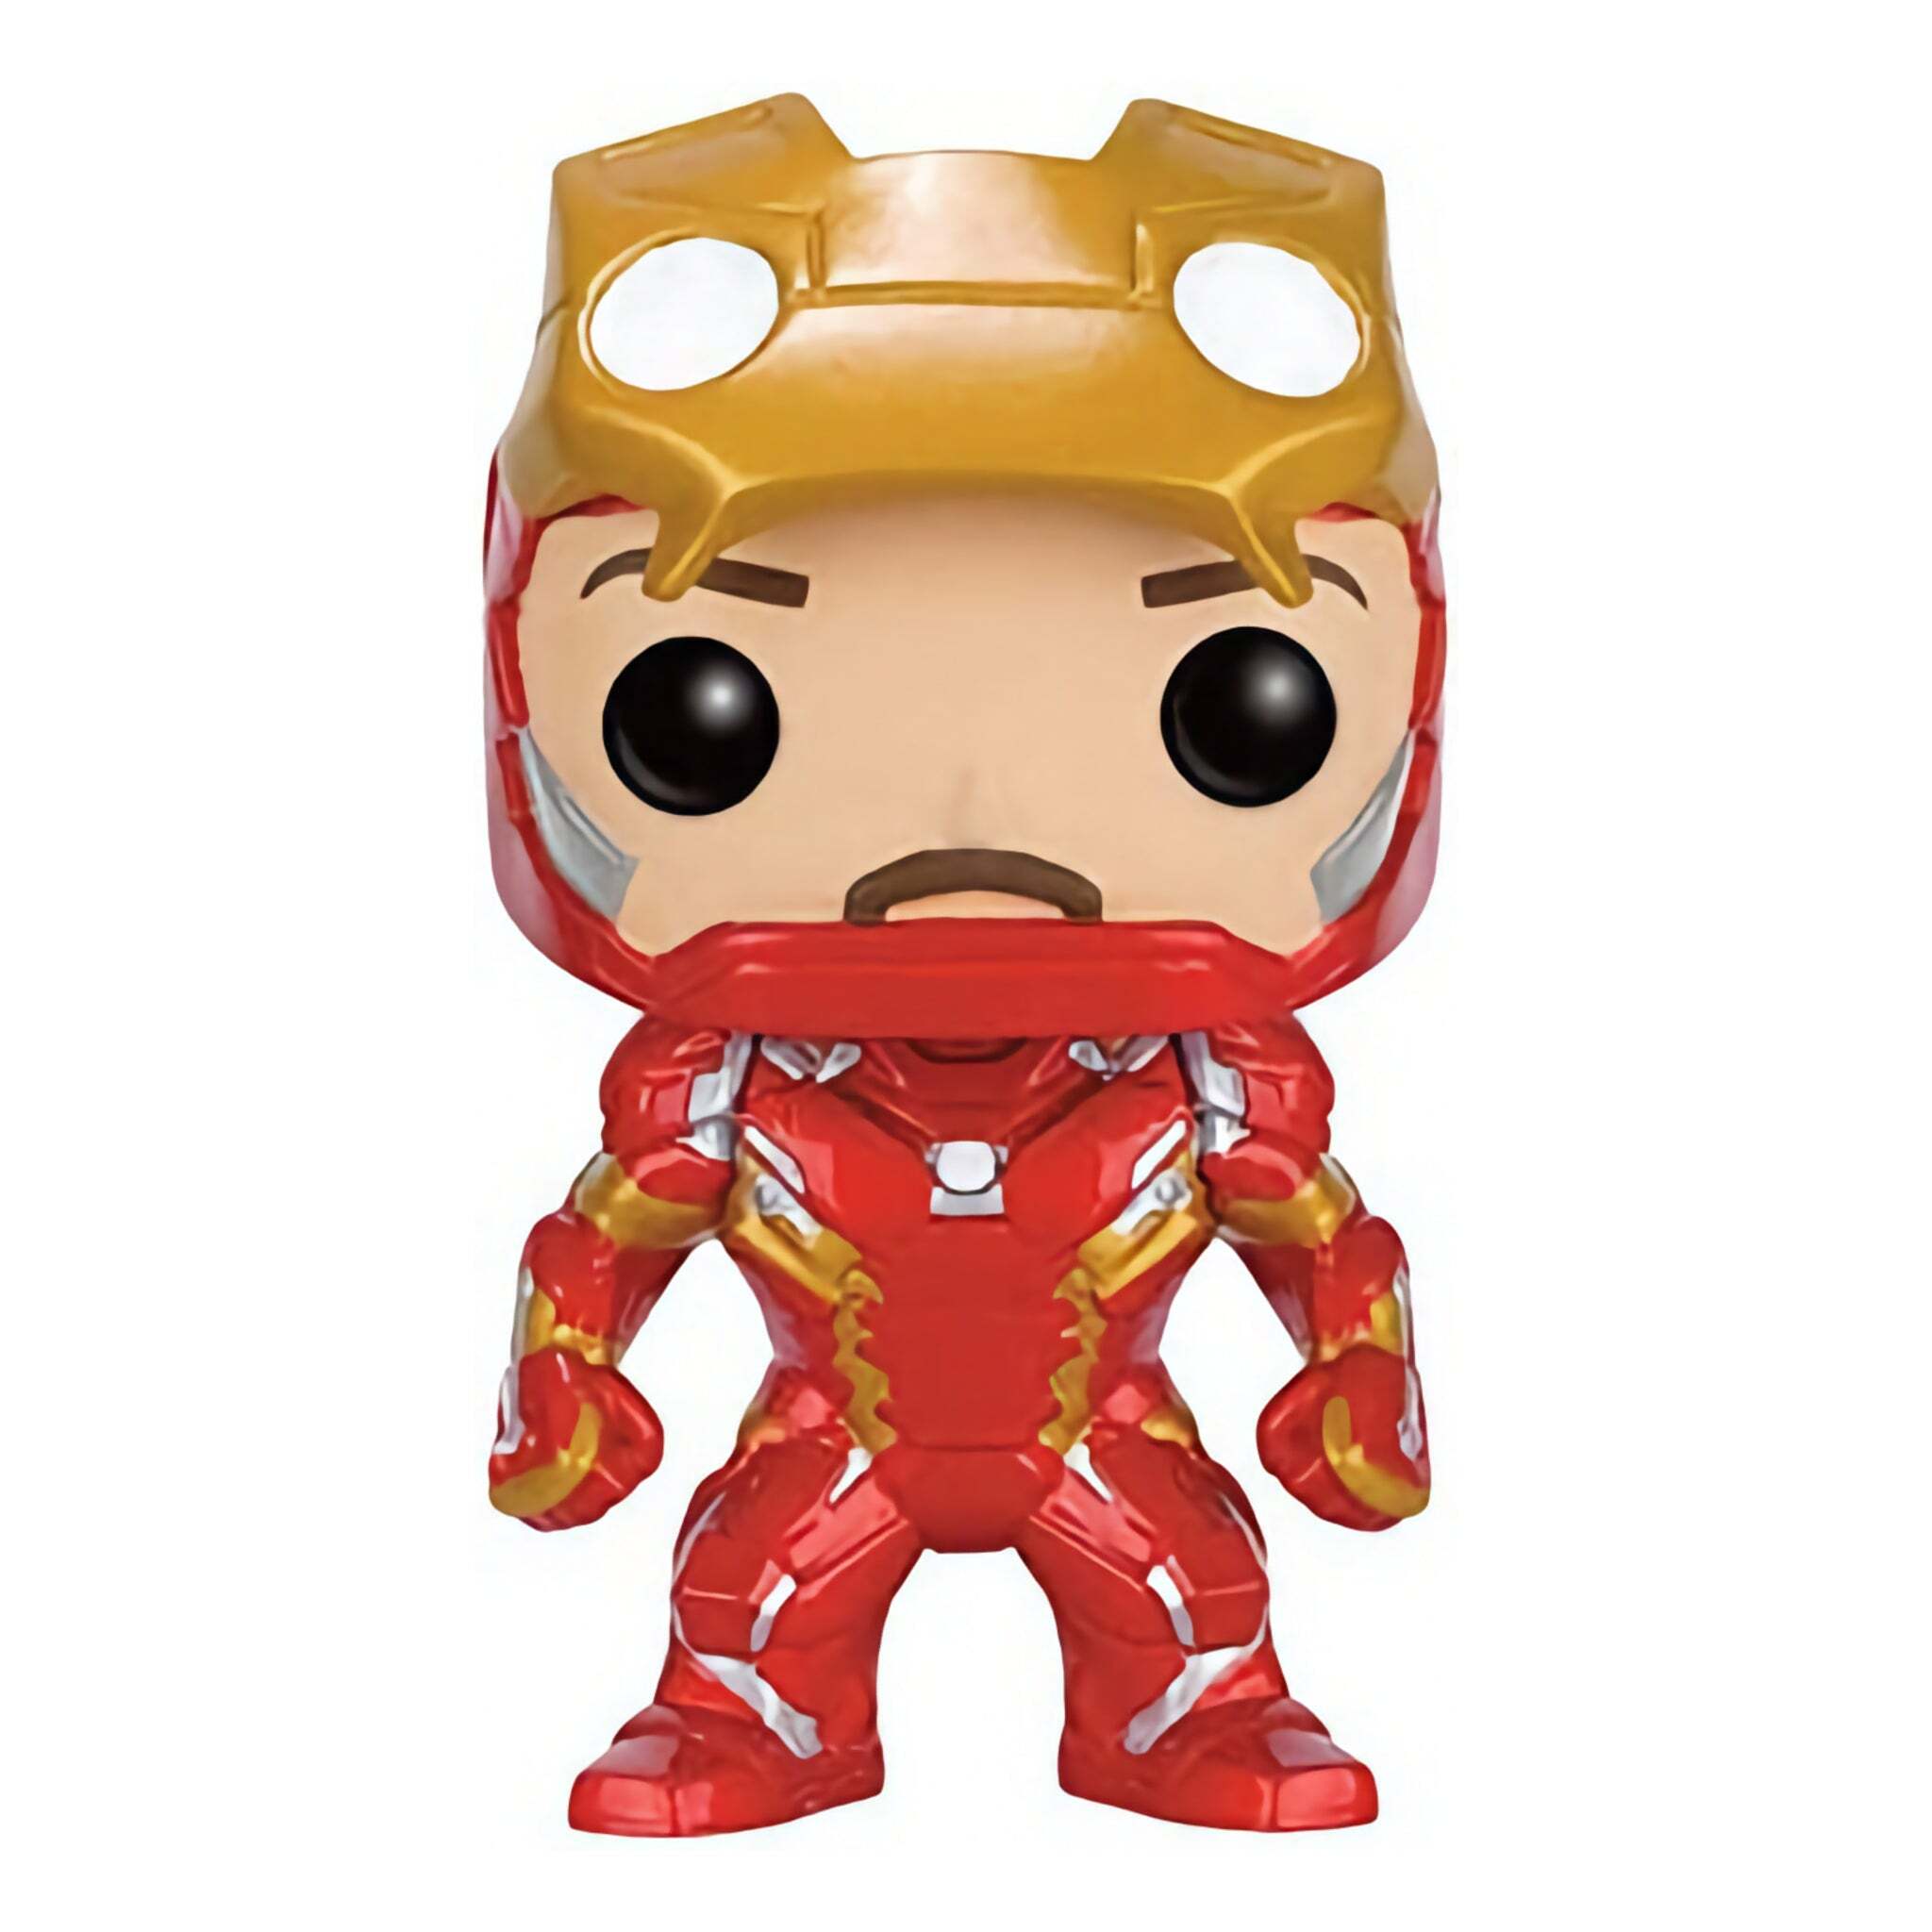 Iron Man [Unmasked] Funko Pop! HOT TOPIC EXCLUSIVE